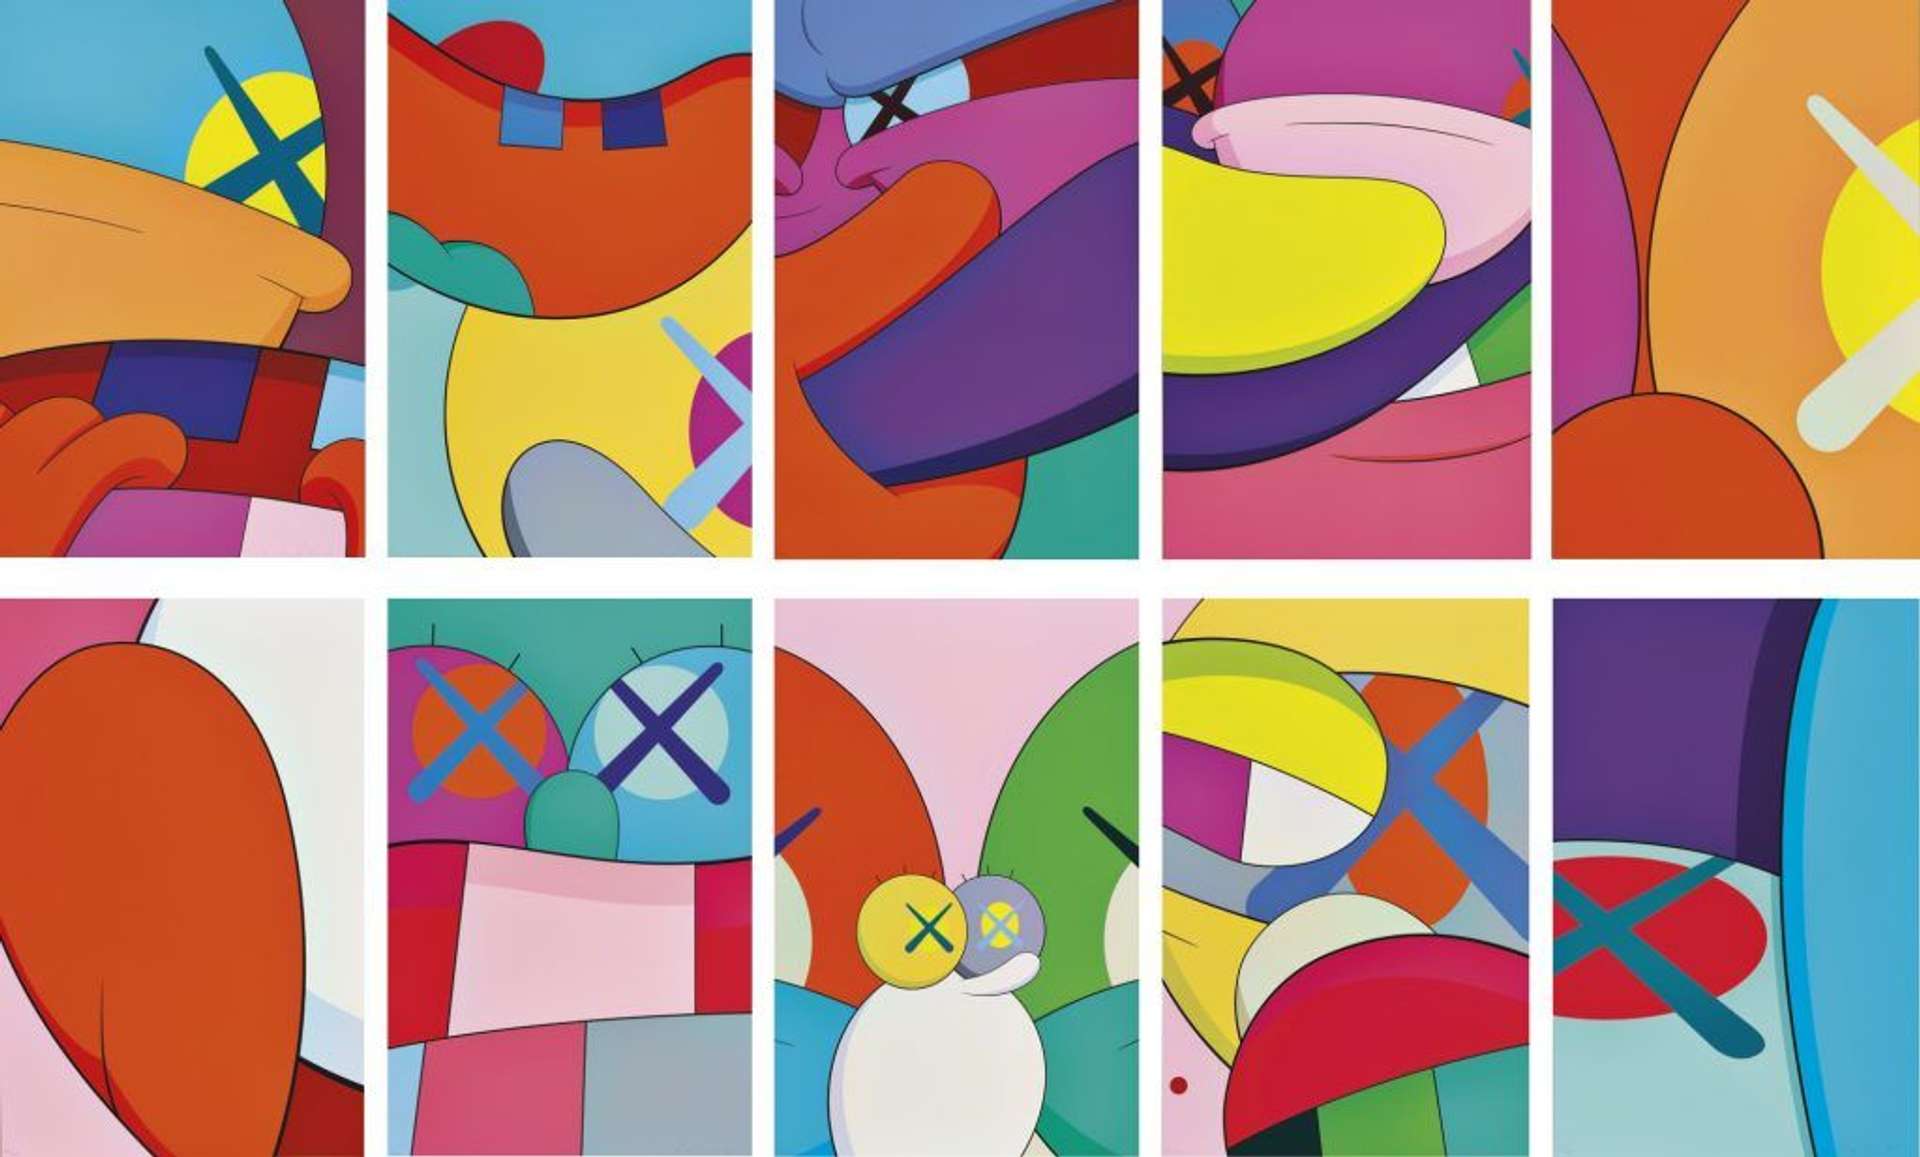 No Reply (complete set) by KAWS